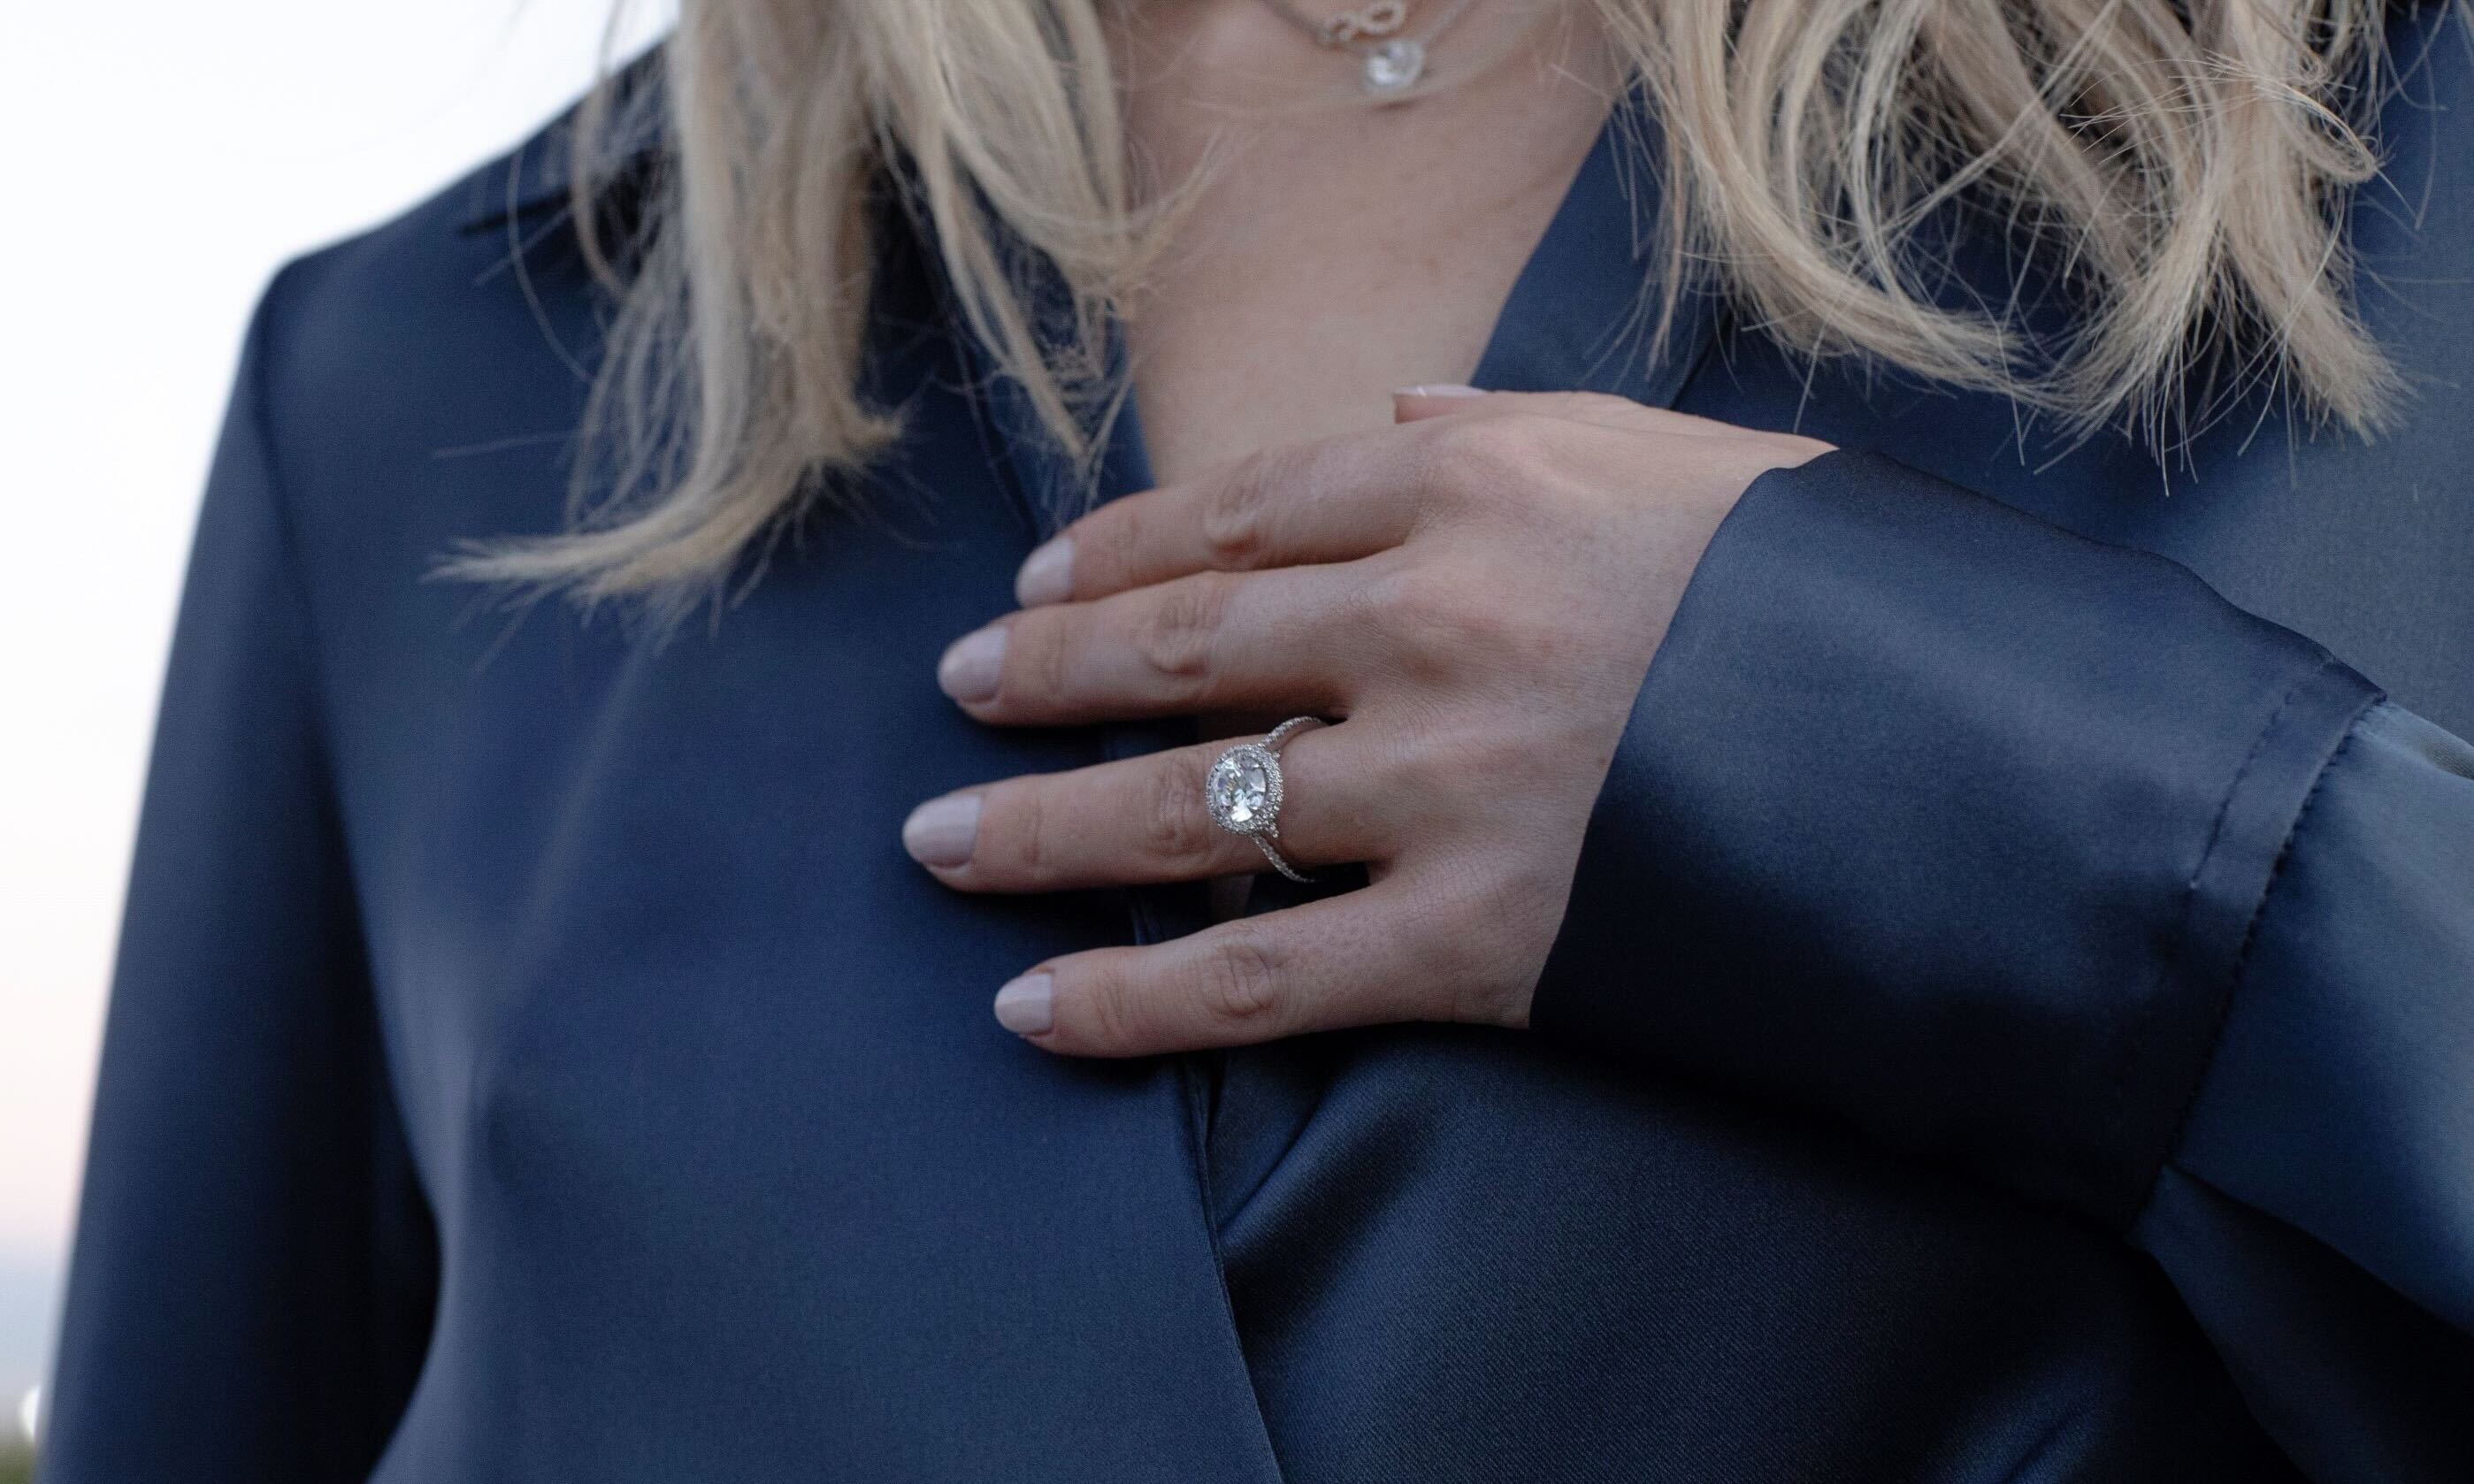 3 Reasons the De Beers “A Diamond is Forever” Campaign Changed the World